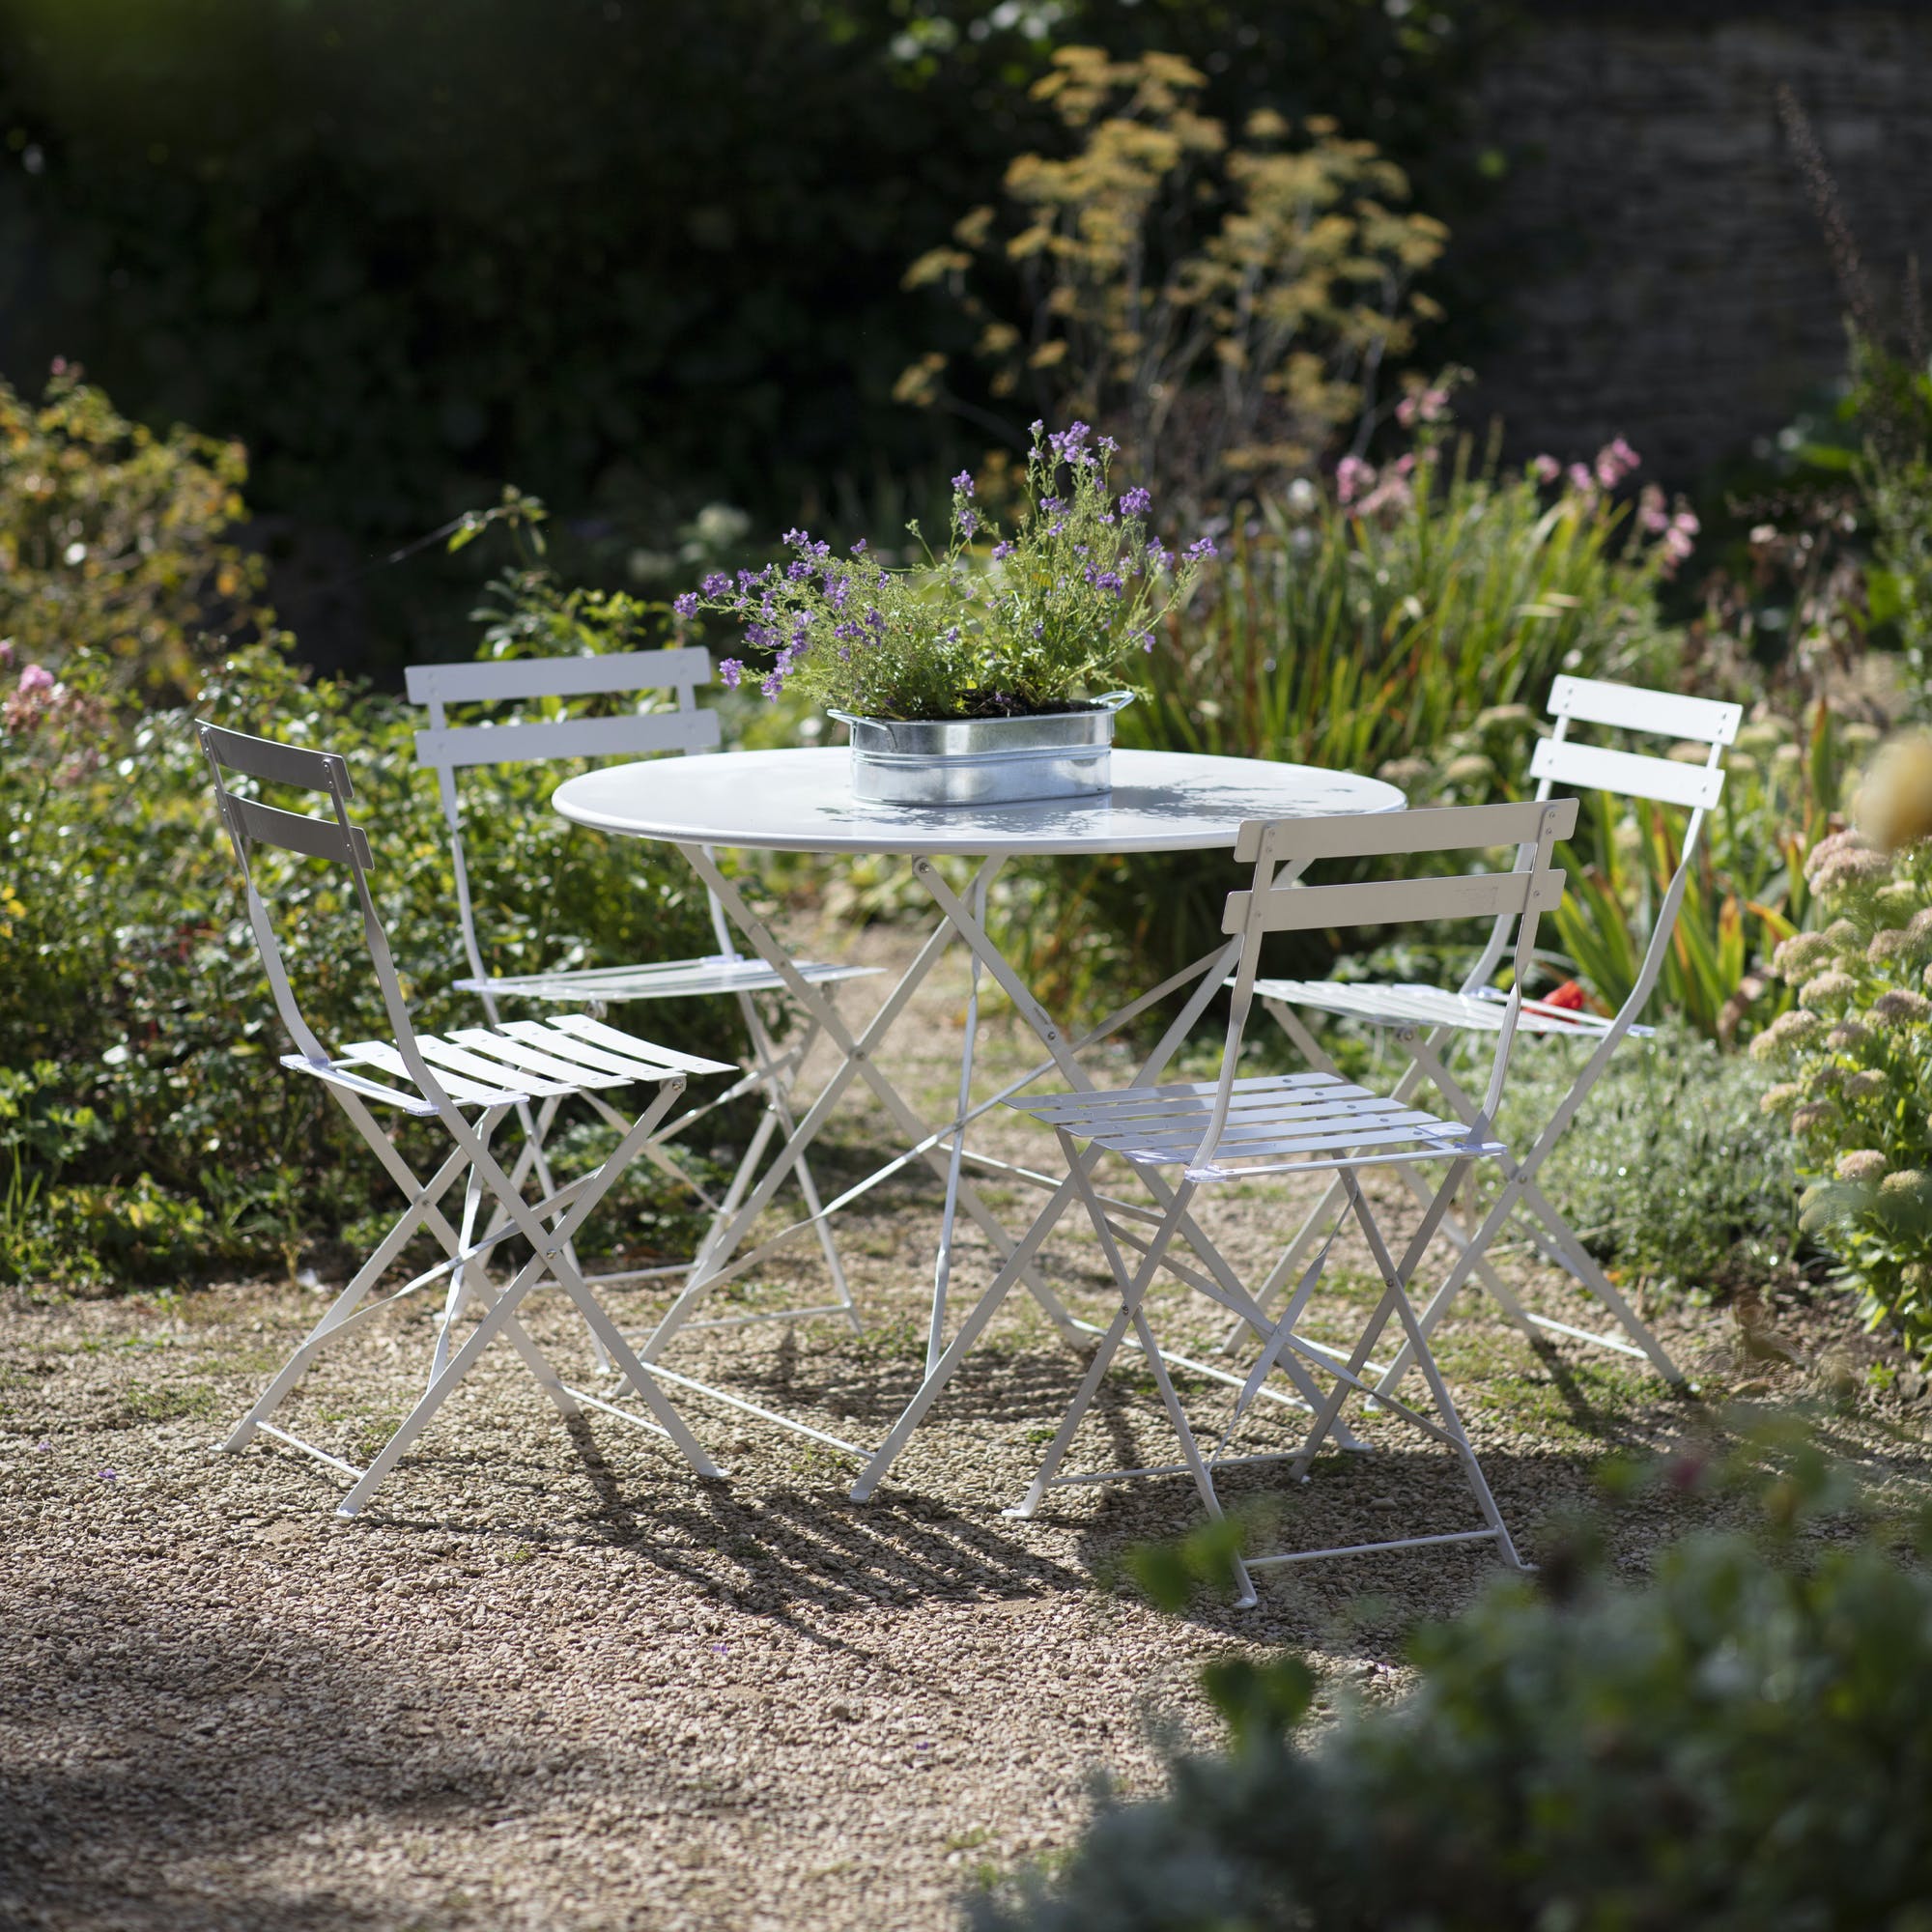 Large Garden Bistro Round Table and 4 Chairs - Chalk White - Duck Barn Interiors